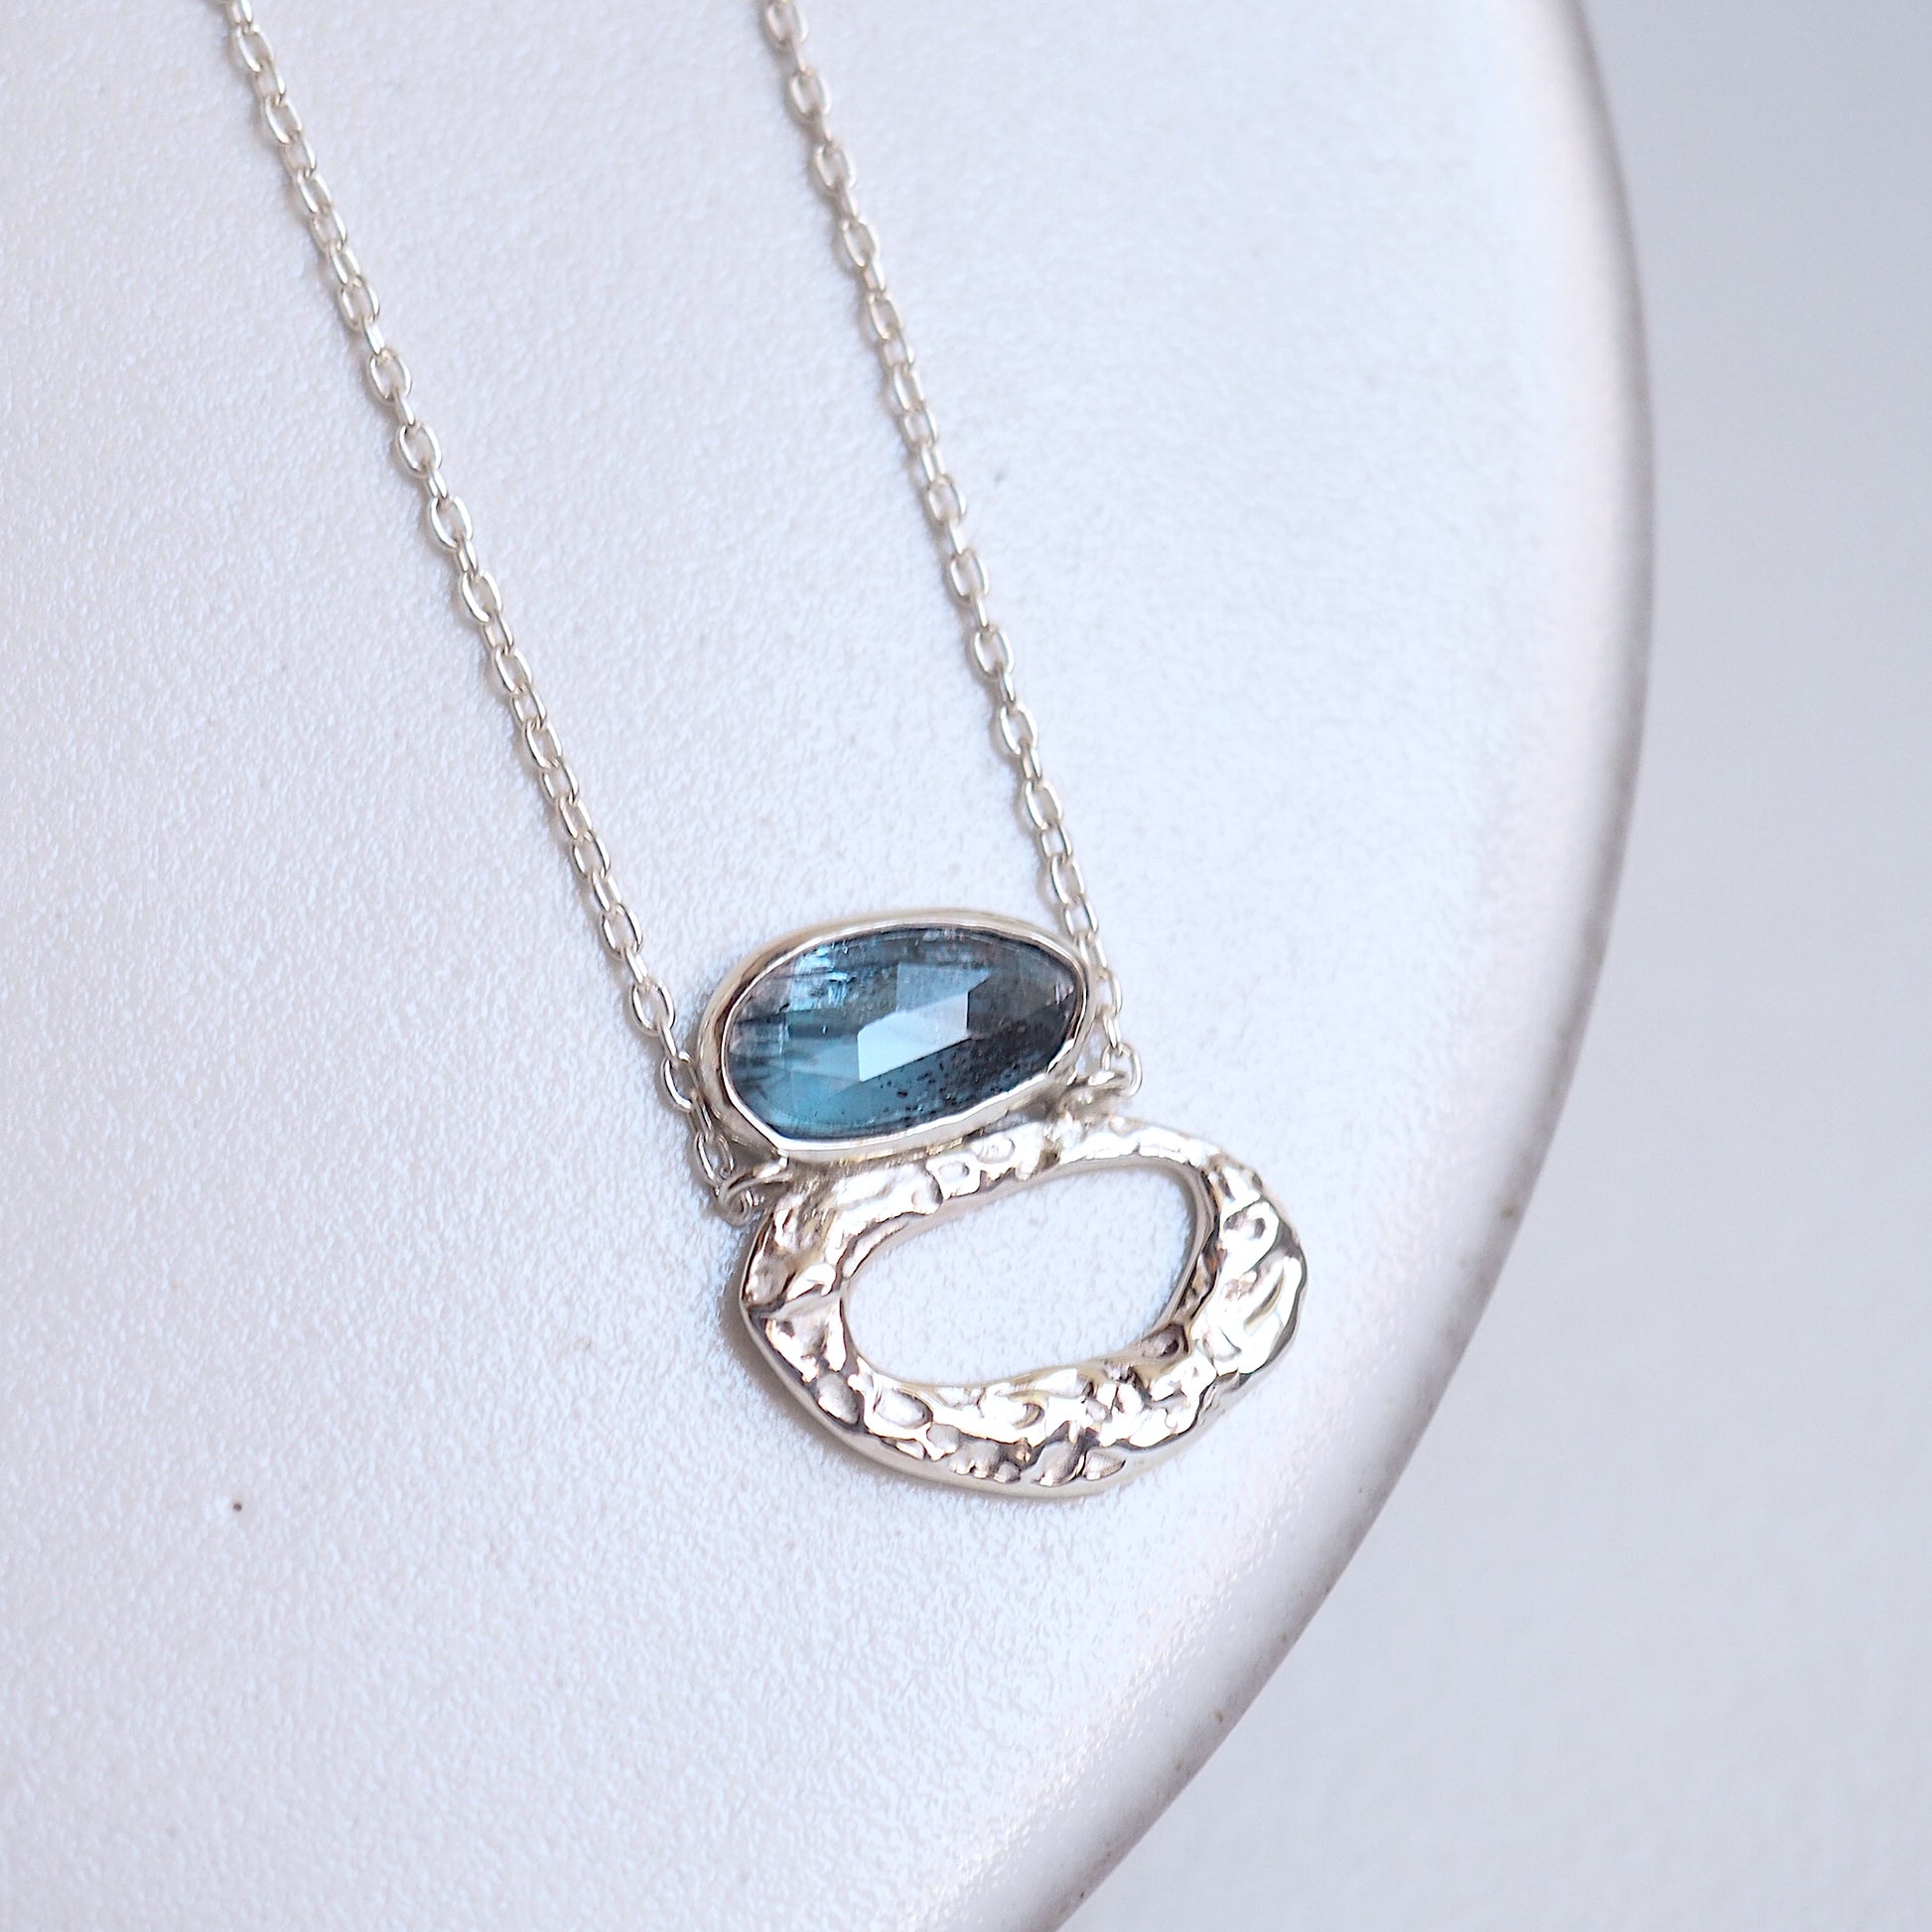 Silver and Kyanite Necklace handcrafted ocean blue stone unique jewelry handmade designer jewels 